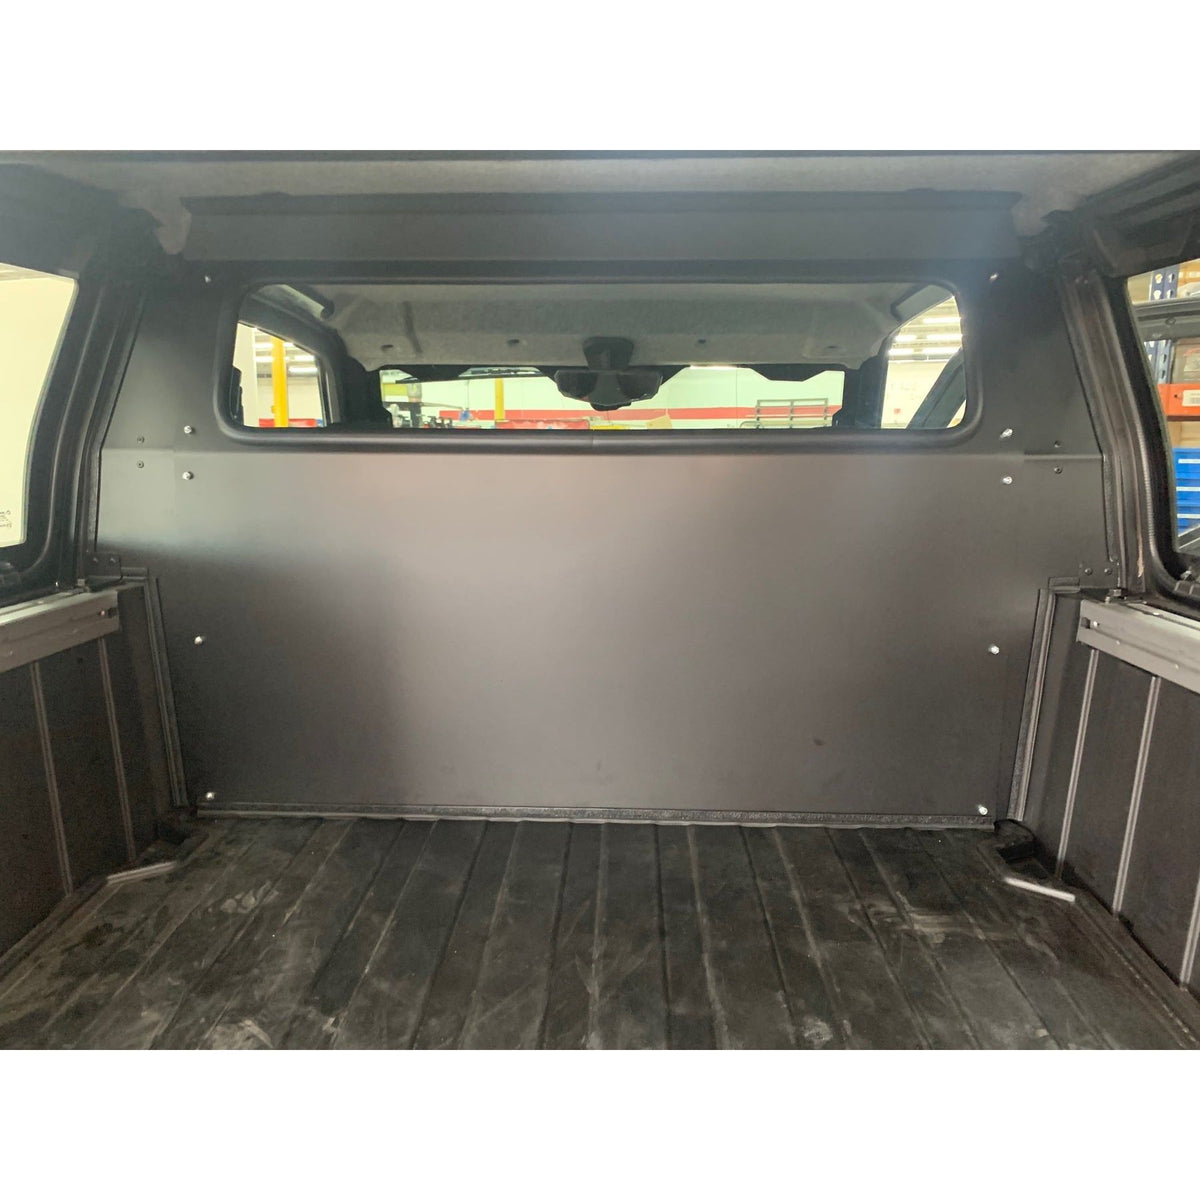 Polaris Xpedition Cab / Bed Divider | Houser Racing